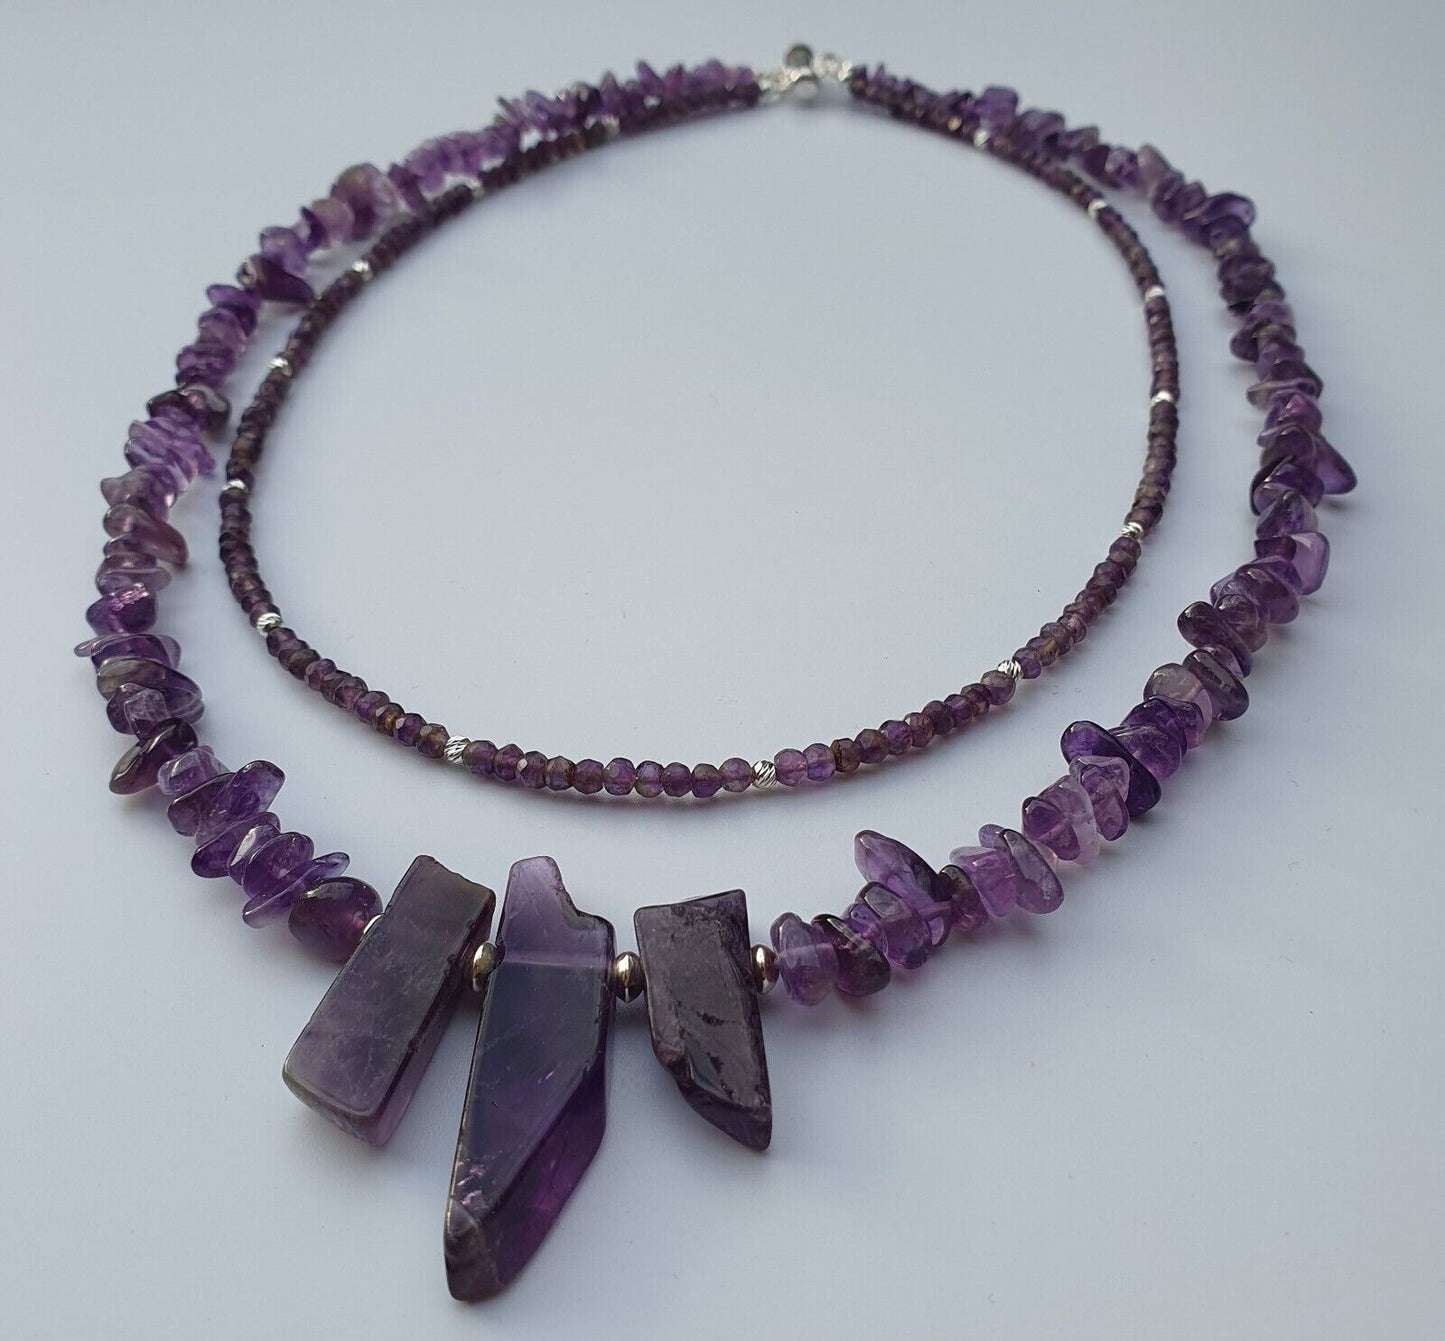 Natural Raw Amethyst Double Layer 925 Sterling Silver Necklace Artisan Handmade